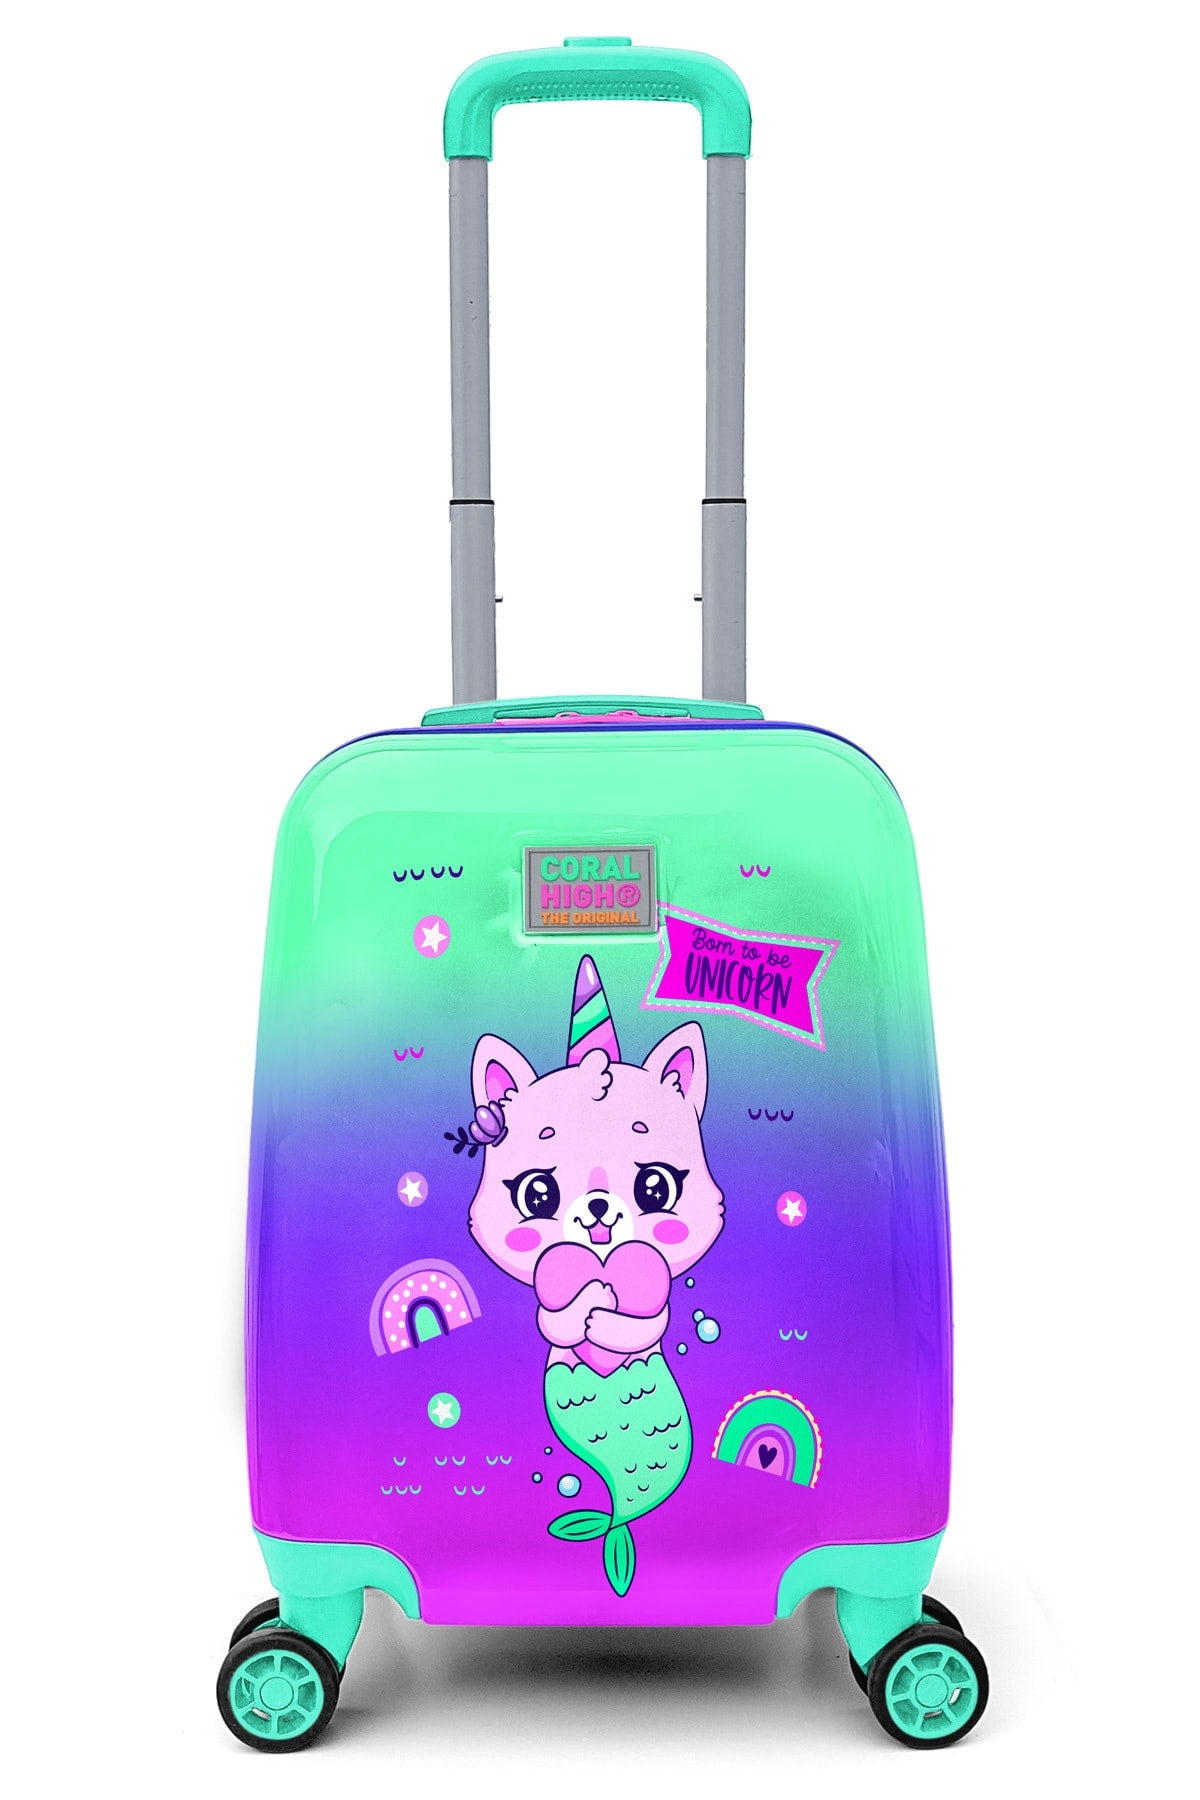 Kids Water Green Lavender Unicorn Cat Patterned Luggage 16718